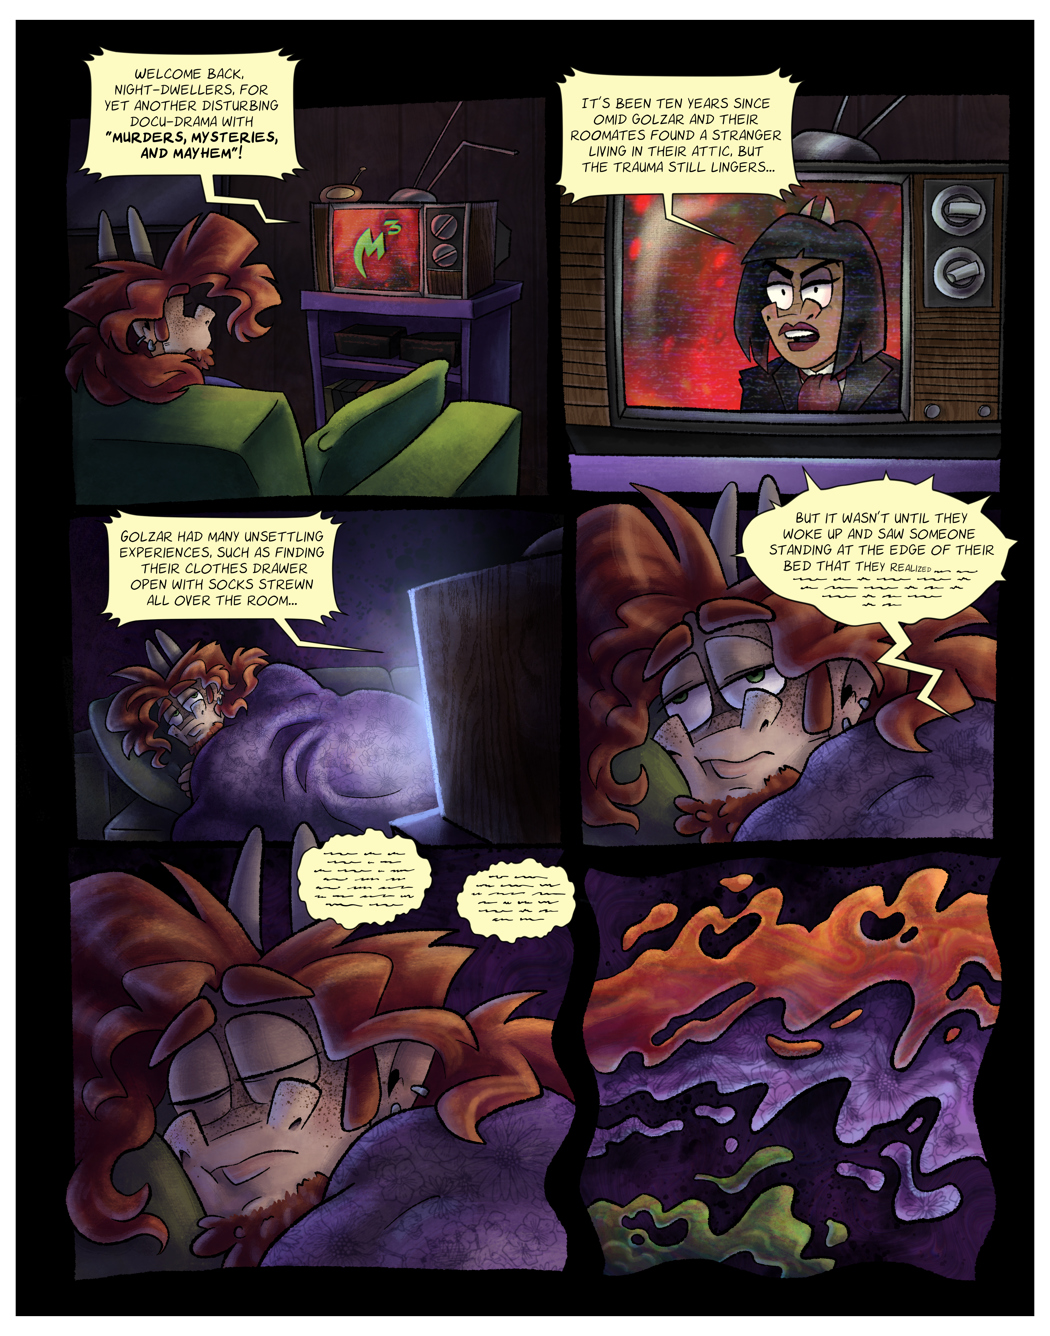 Chapter 3 Page 12: Drifting off